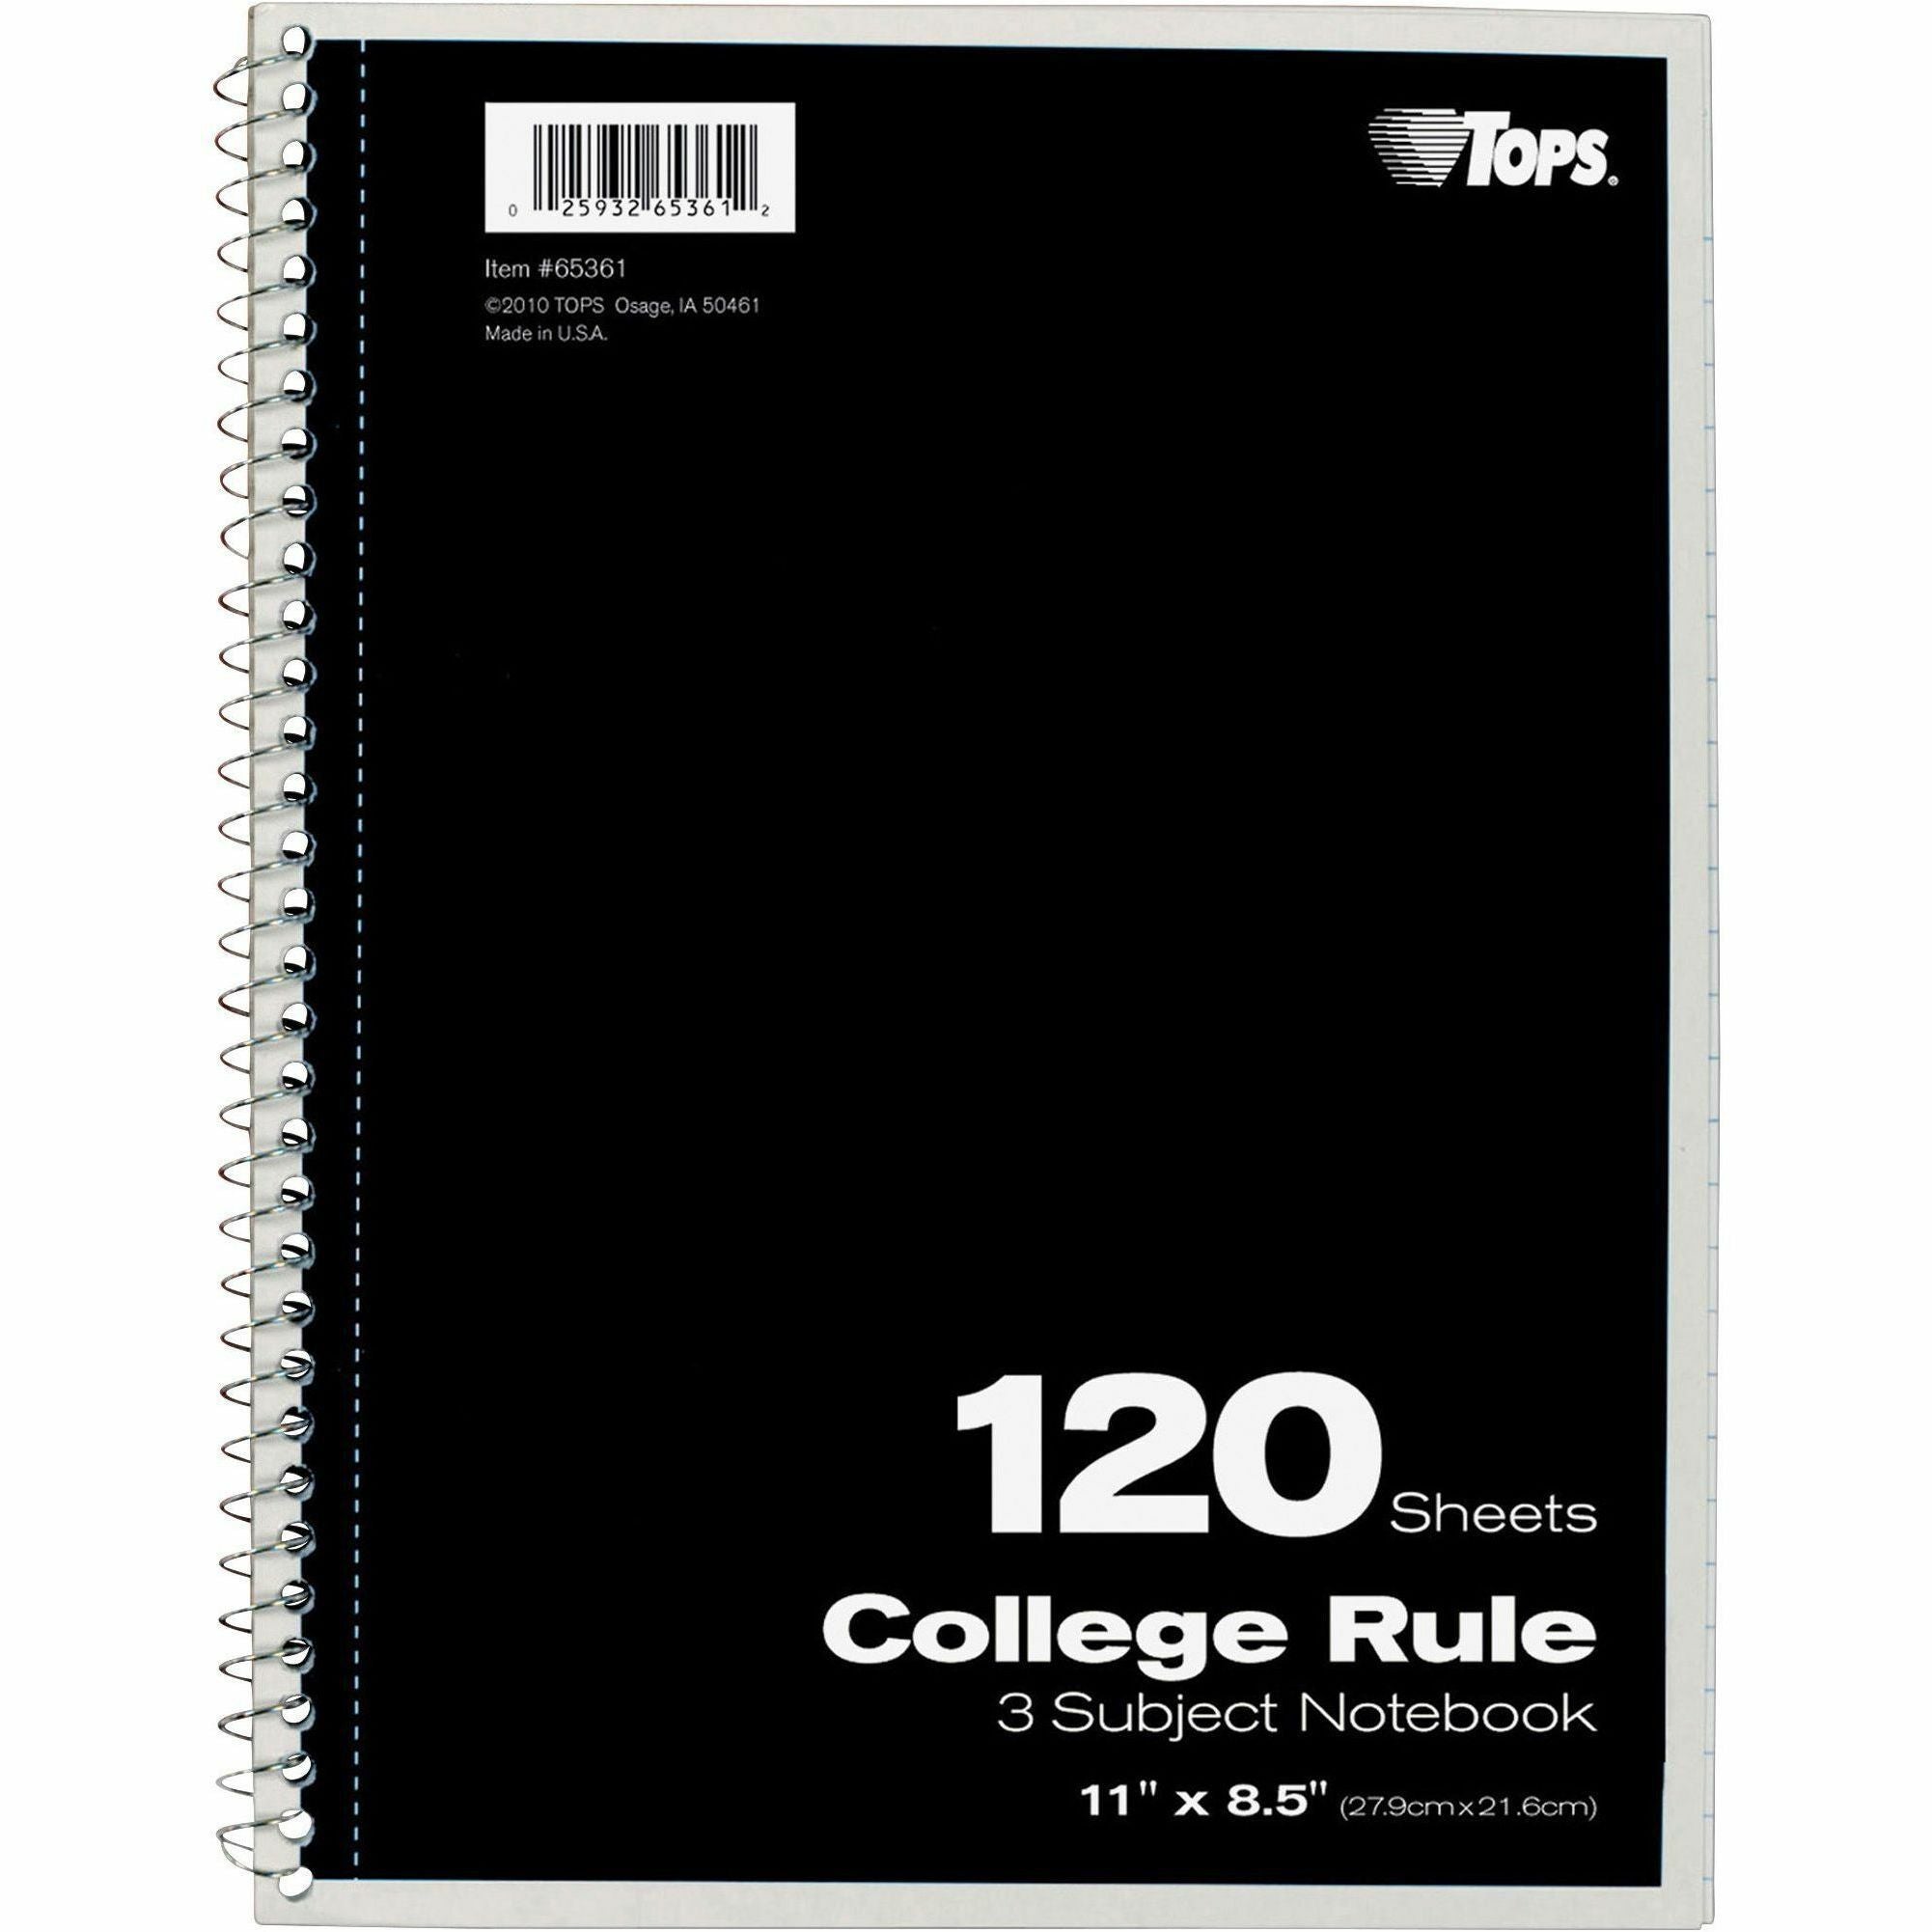 TOPS 3 - subject College Ruled Notebook - Letter - 120 Sheets - Wire Bound - Letter - 8 1/2" x 11" - 0.25" x 8.5" x 11" - Assorted Paper - Black, Red, Blue, Green, Purple Cover - Divider, Perforated - 1 Each - 